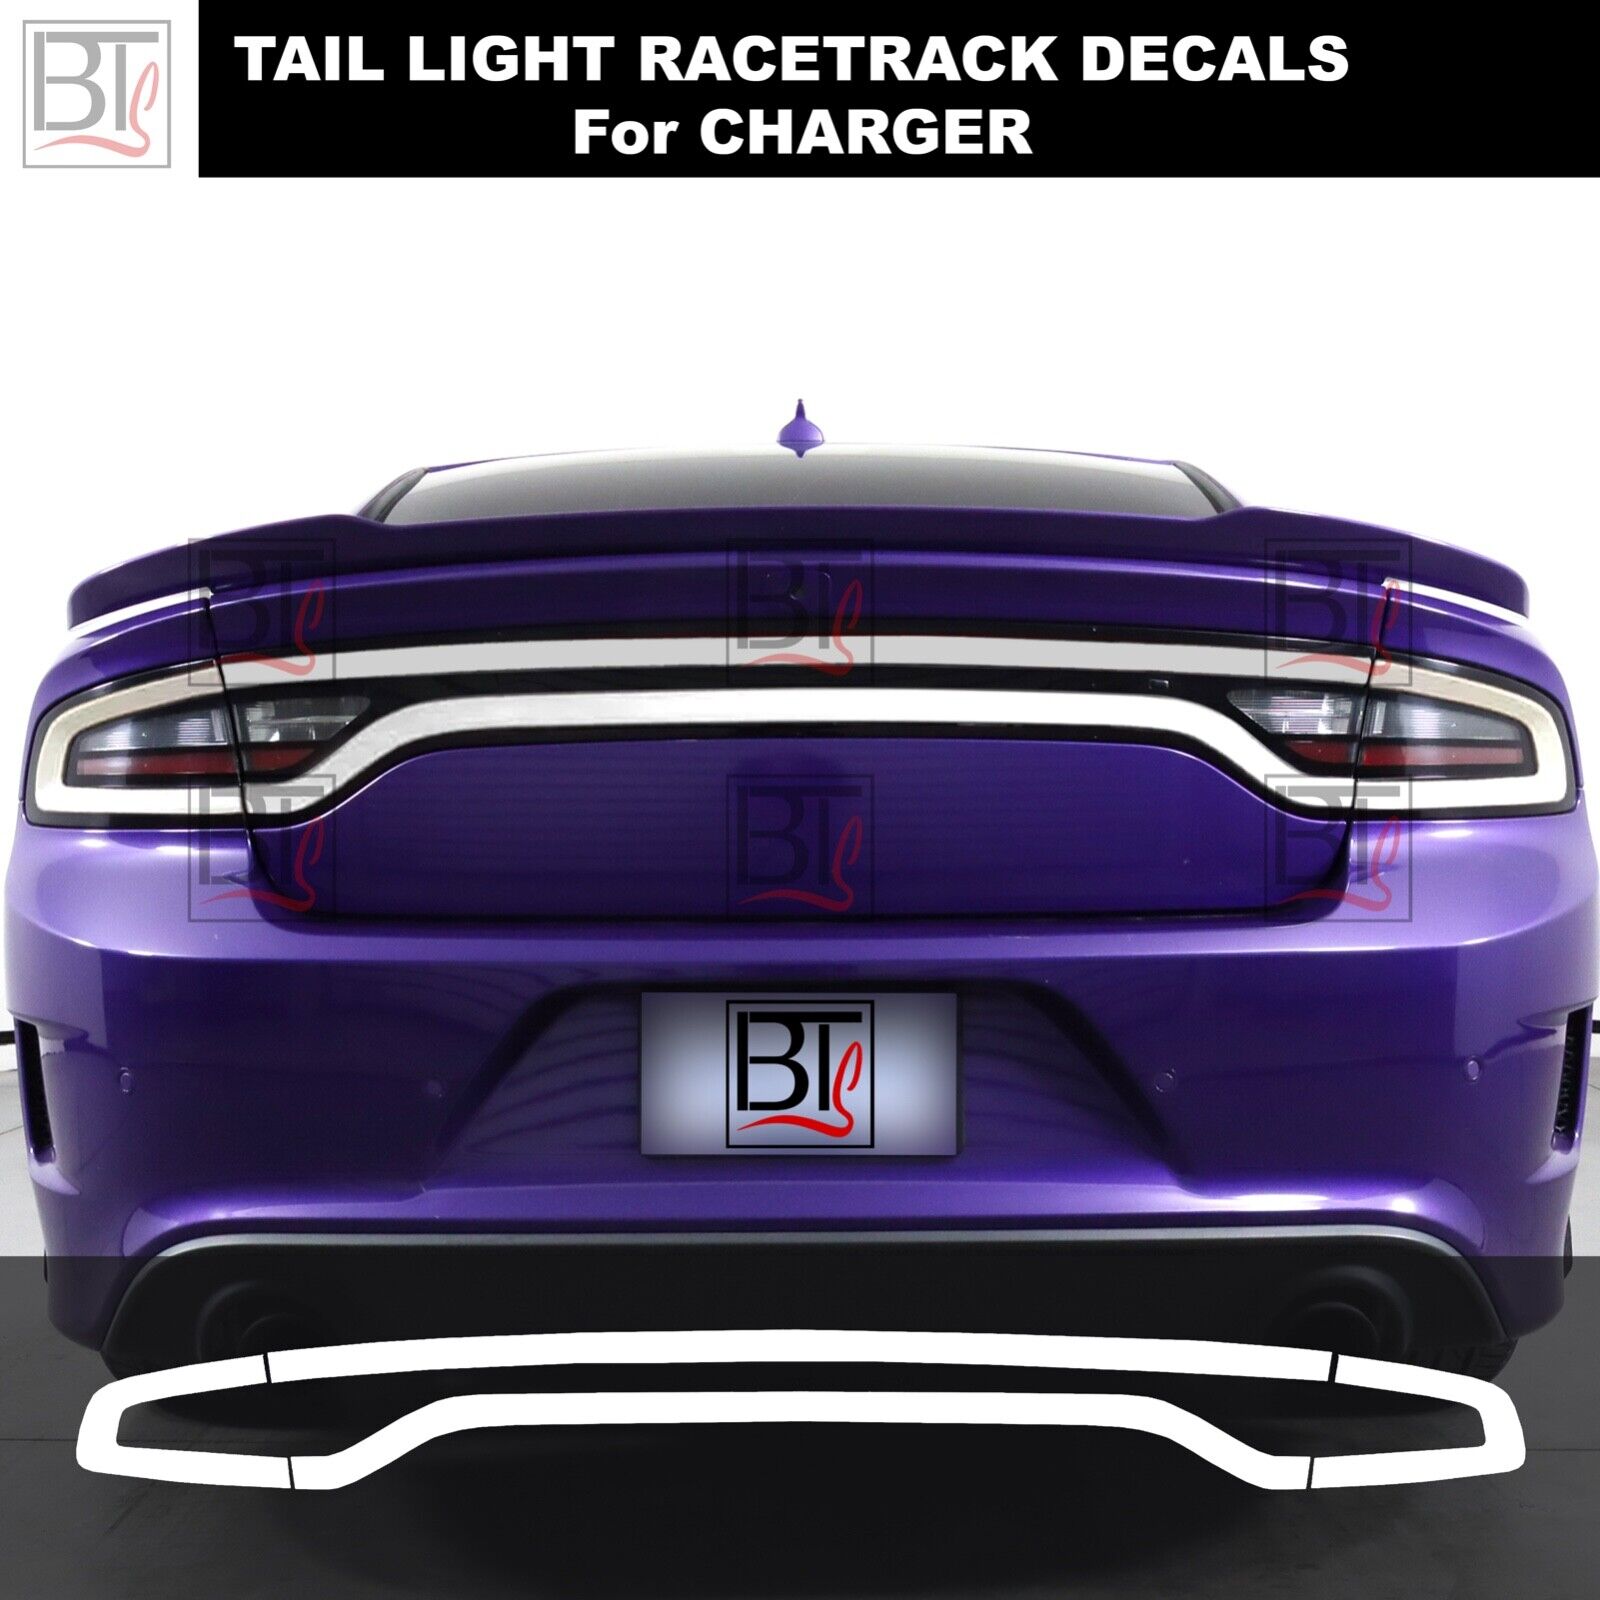 For Charger Race Track Tail Light Rear White Vinyl Decal Tint Overlays Smoke